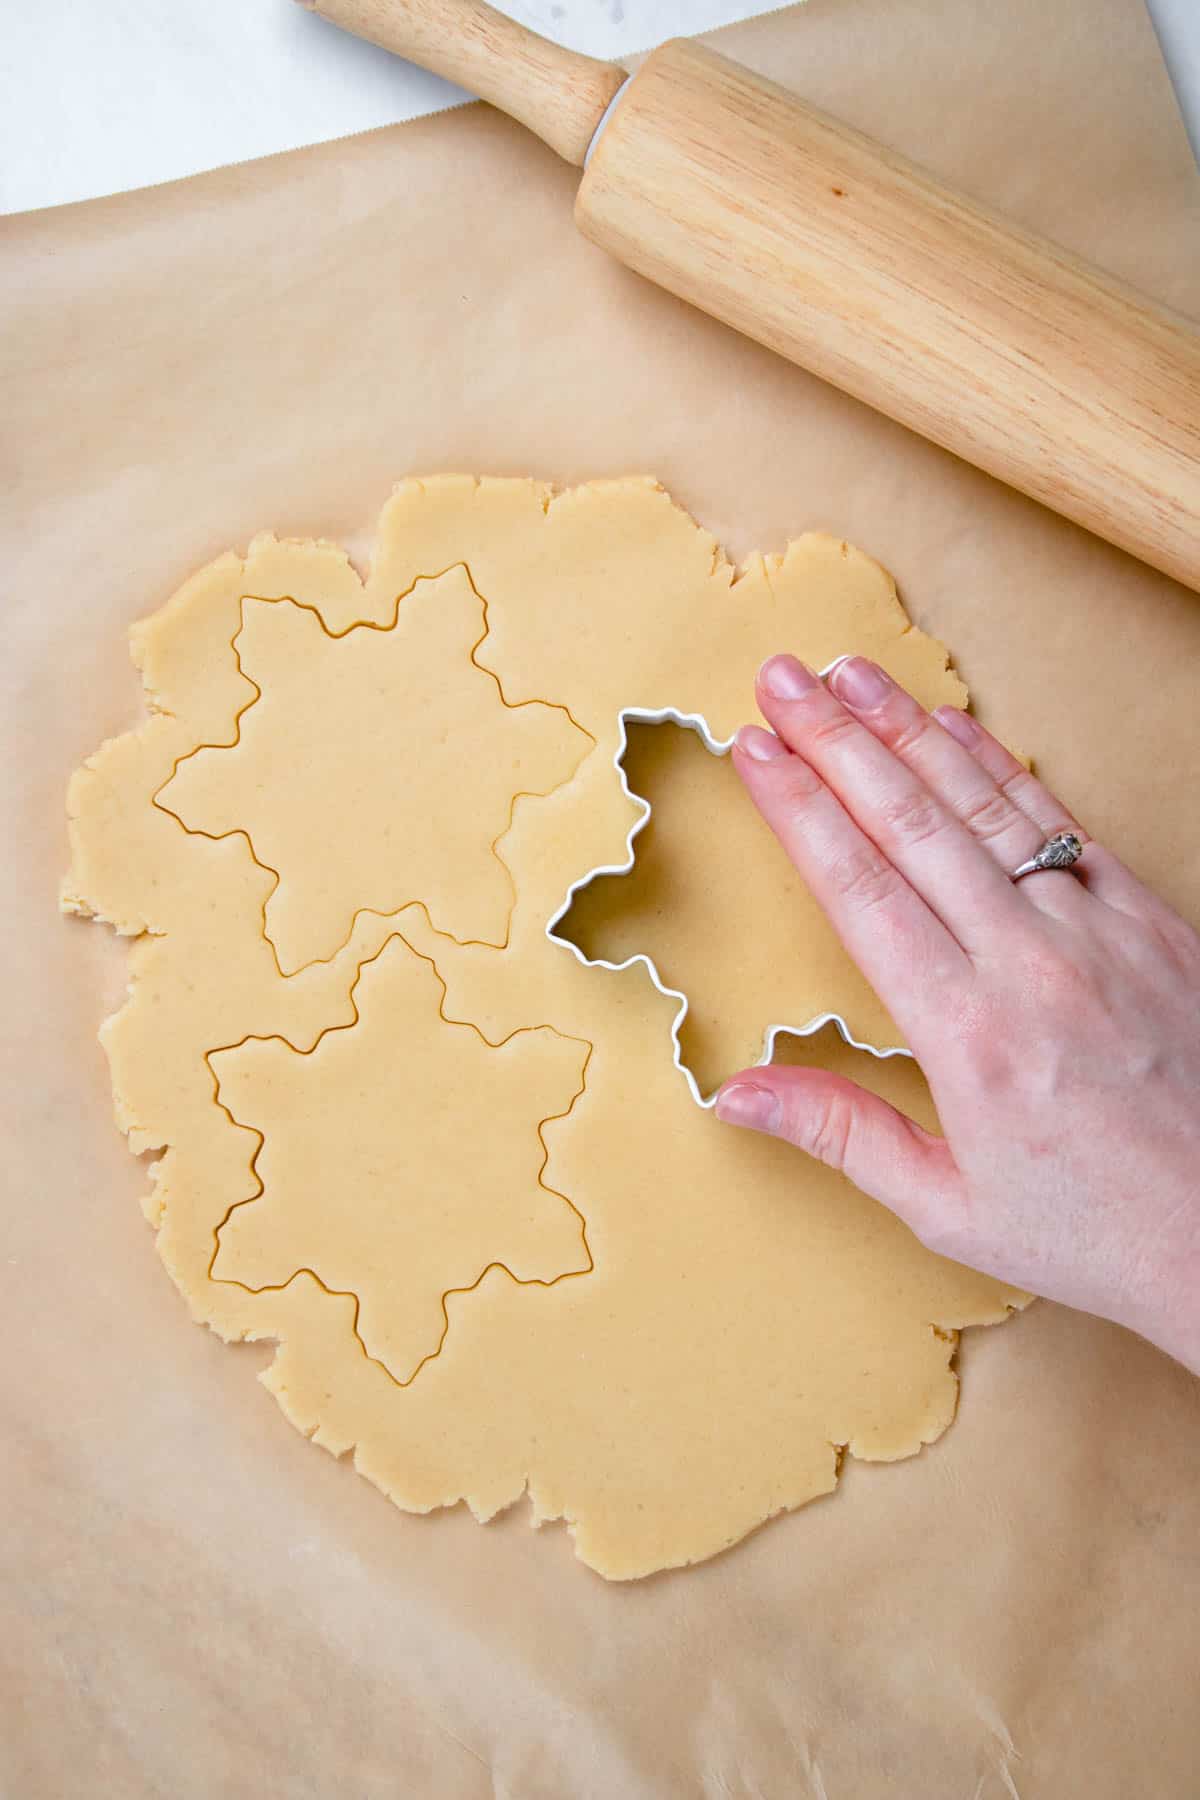 Process photos of cutting out cookies on a rolled dough.